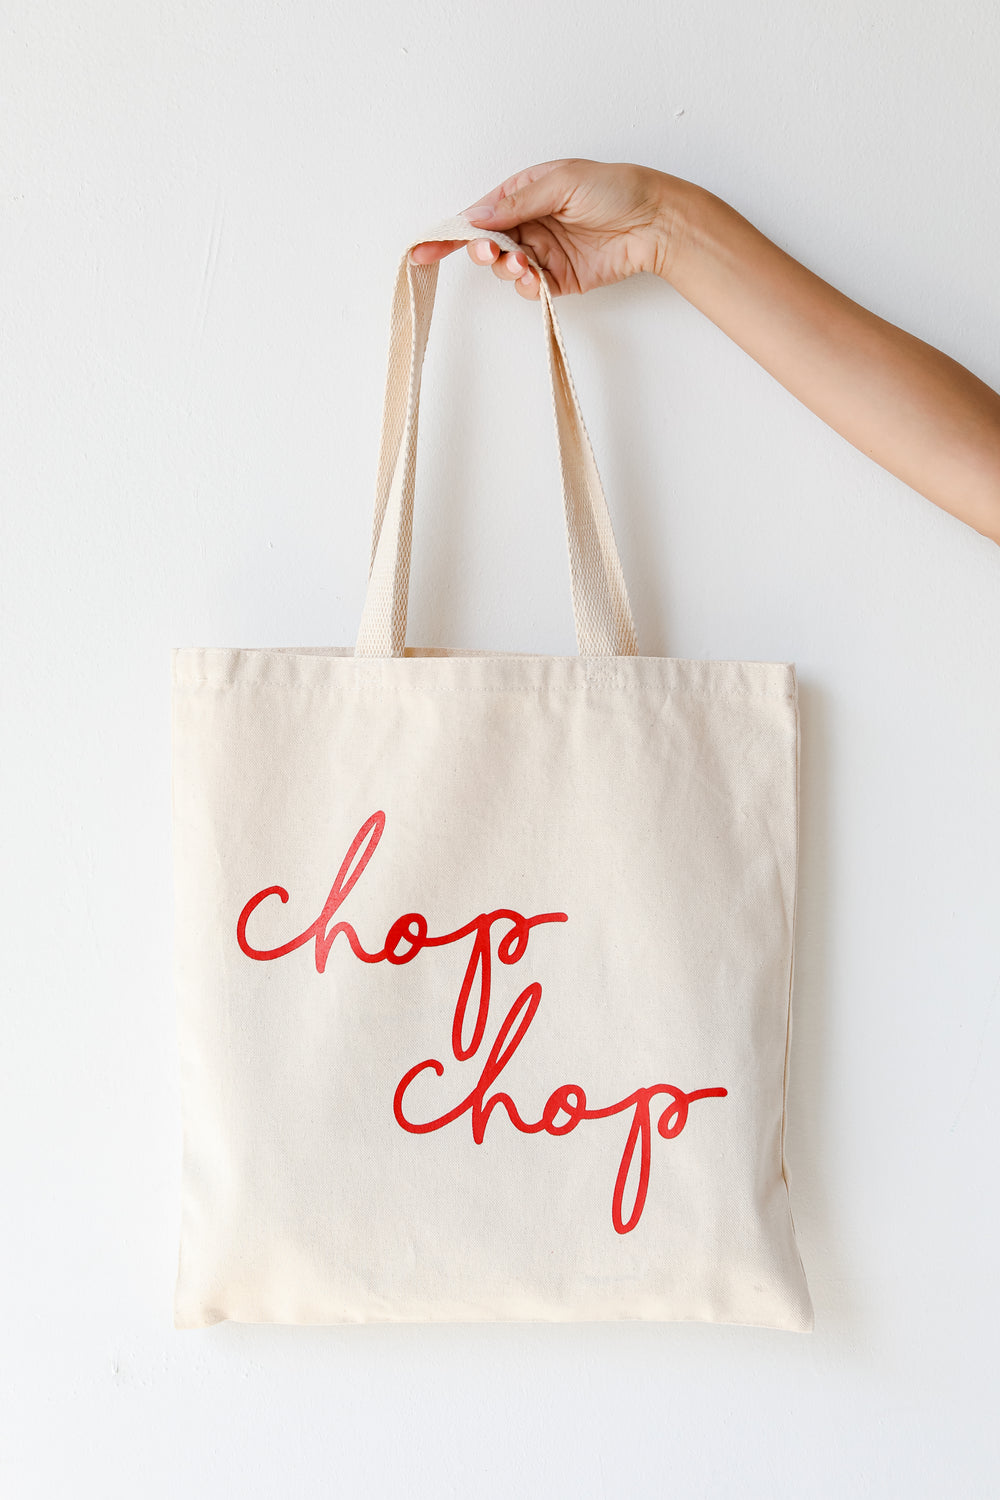 Chop Chop Tote Bag from dress up